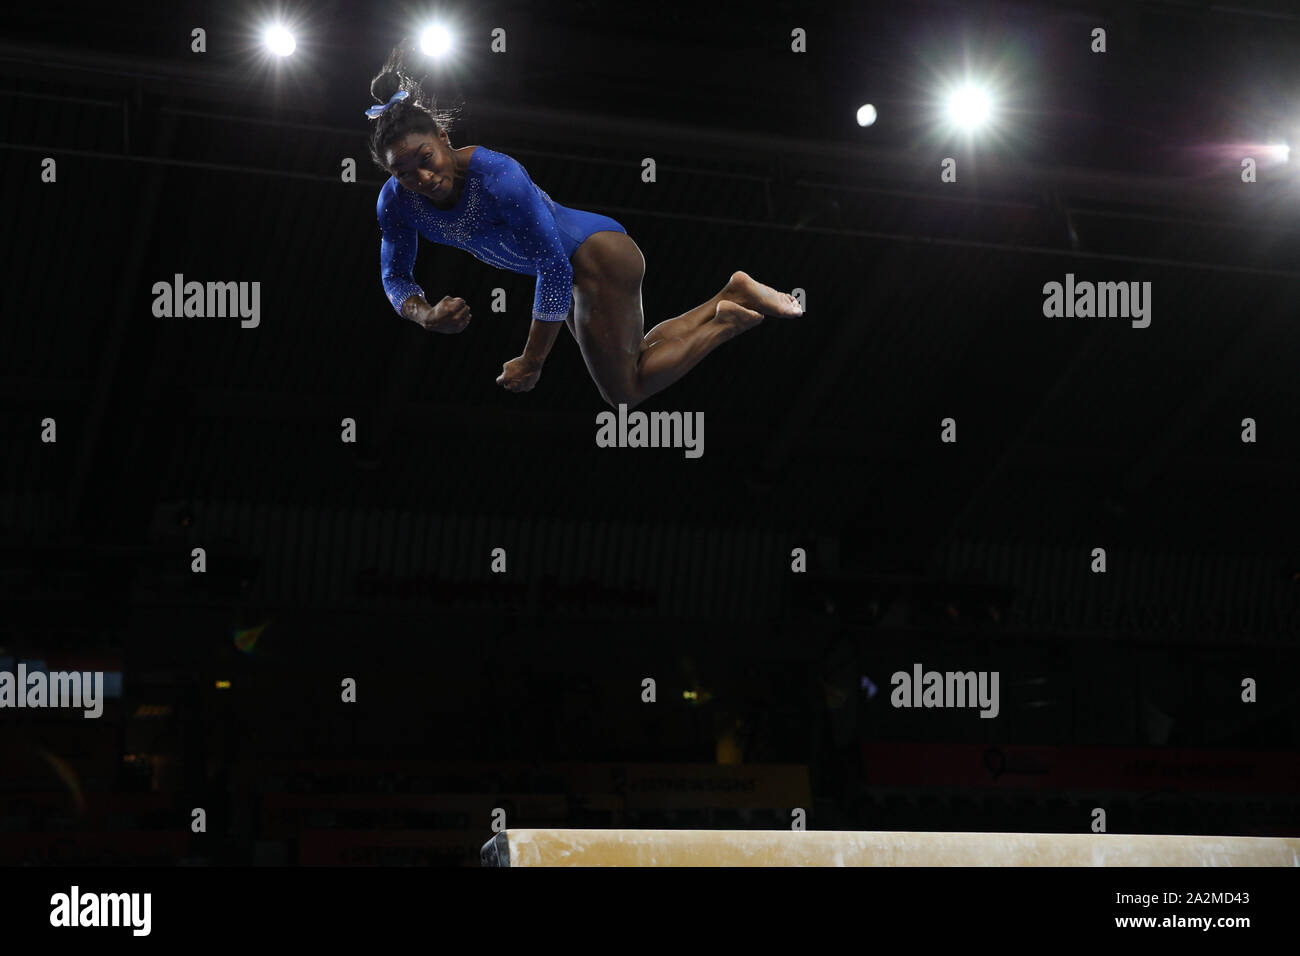 Stuttgart, Germany. 1st Oct, 2019. Gymnast Simone Biles from the USA during the podium training day at the 2019 World Artistic Gymnastics Championships in Stuttgart, Germany. Biles warms up a double-twisting double back dismount, a skill she hopes will be named after her. Melissa J. Perenson/CSM/Alamy Live News Stock Photo